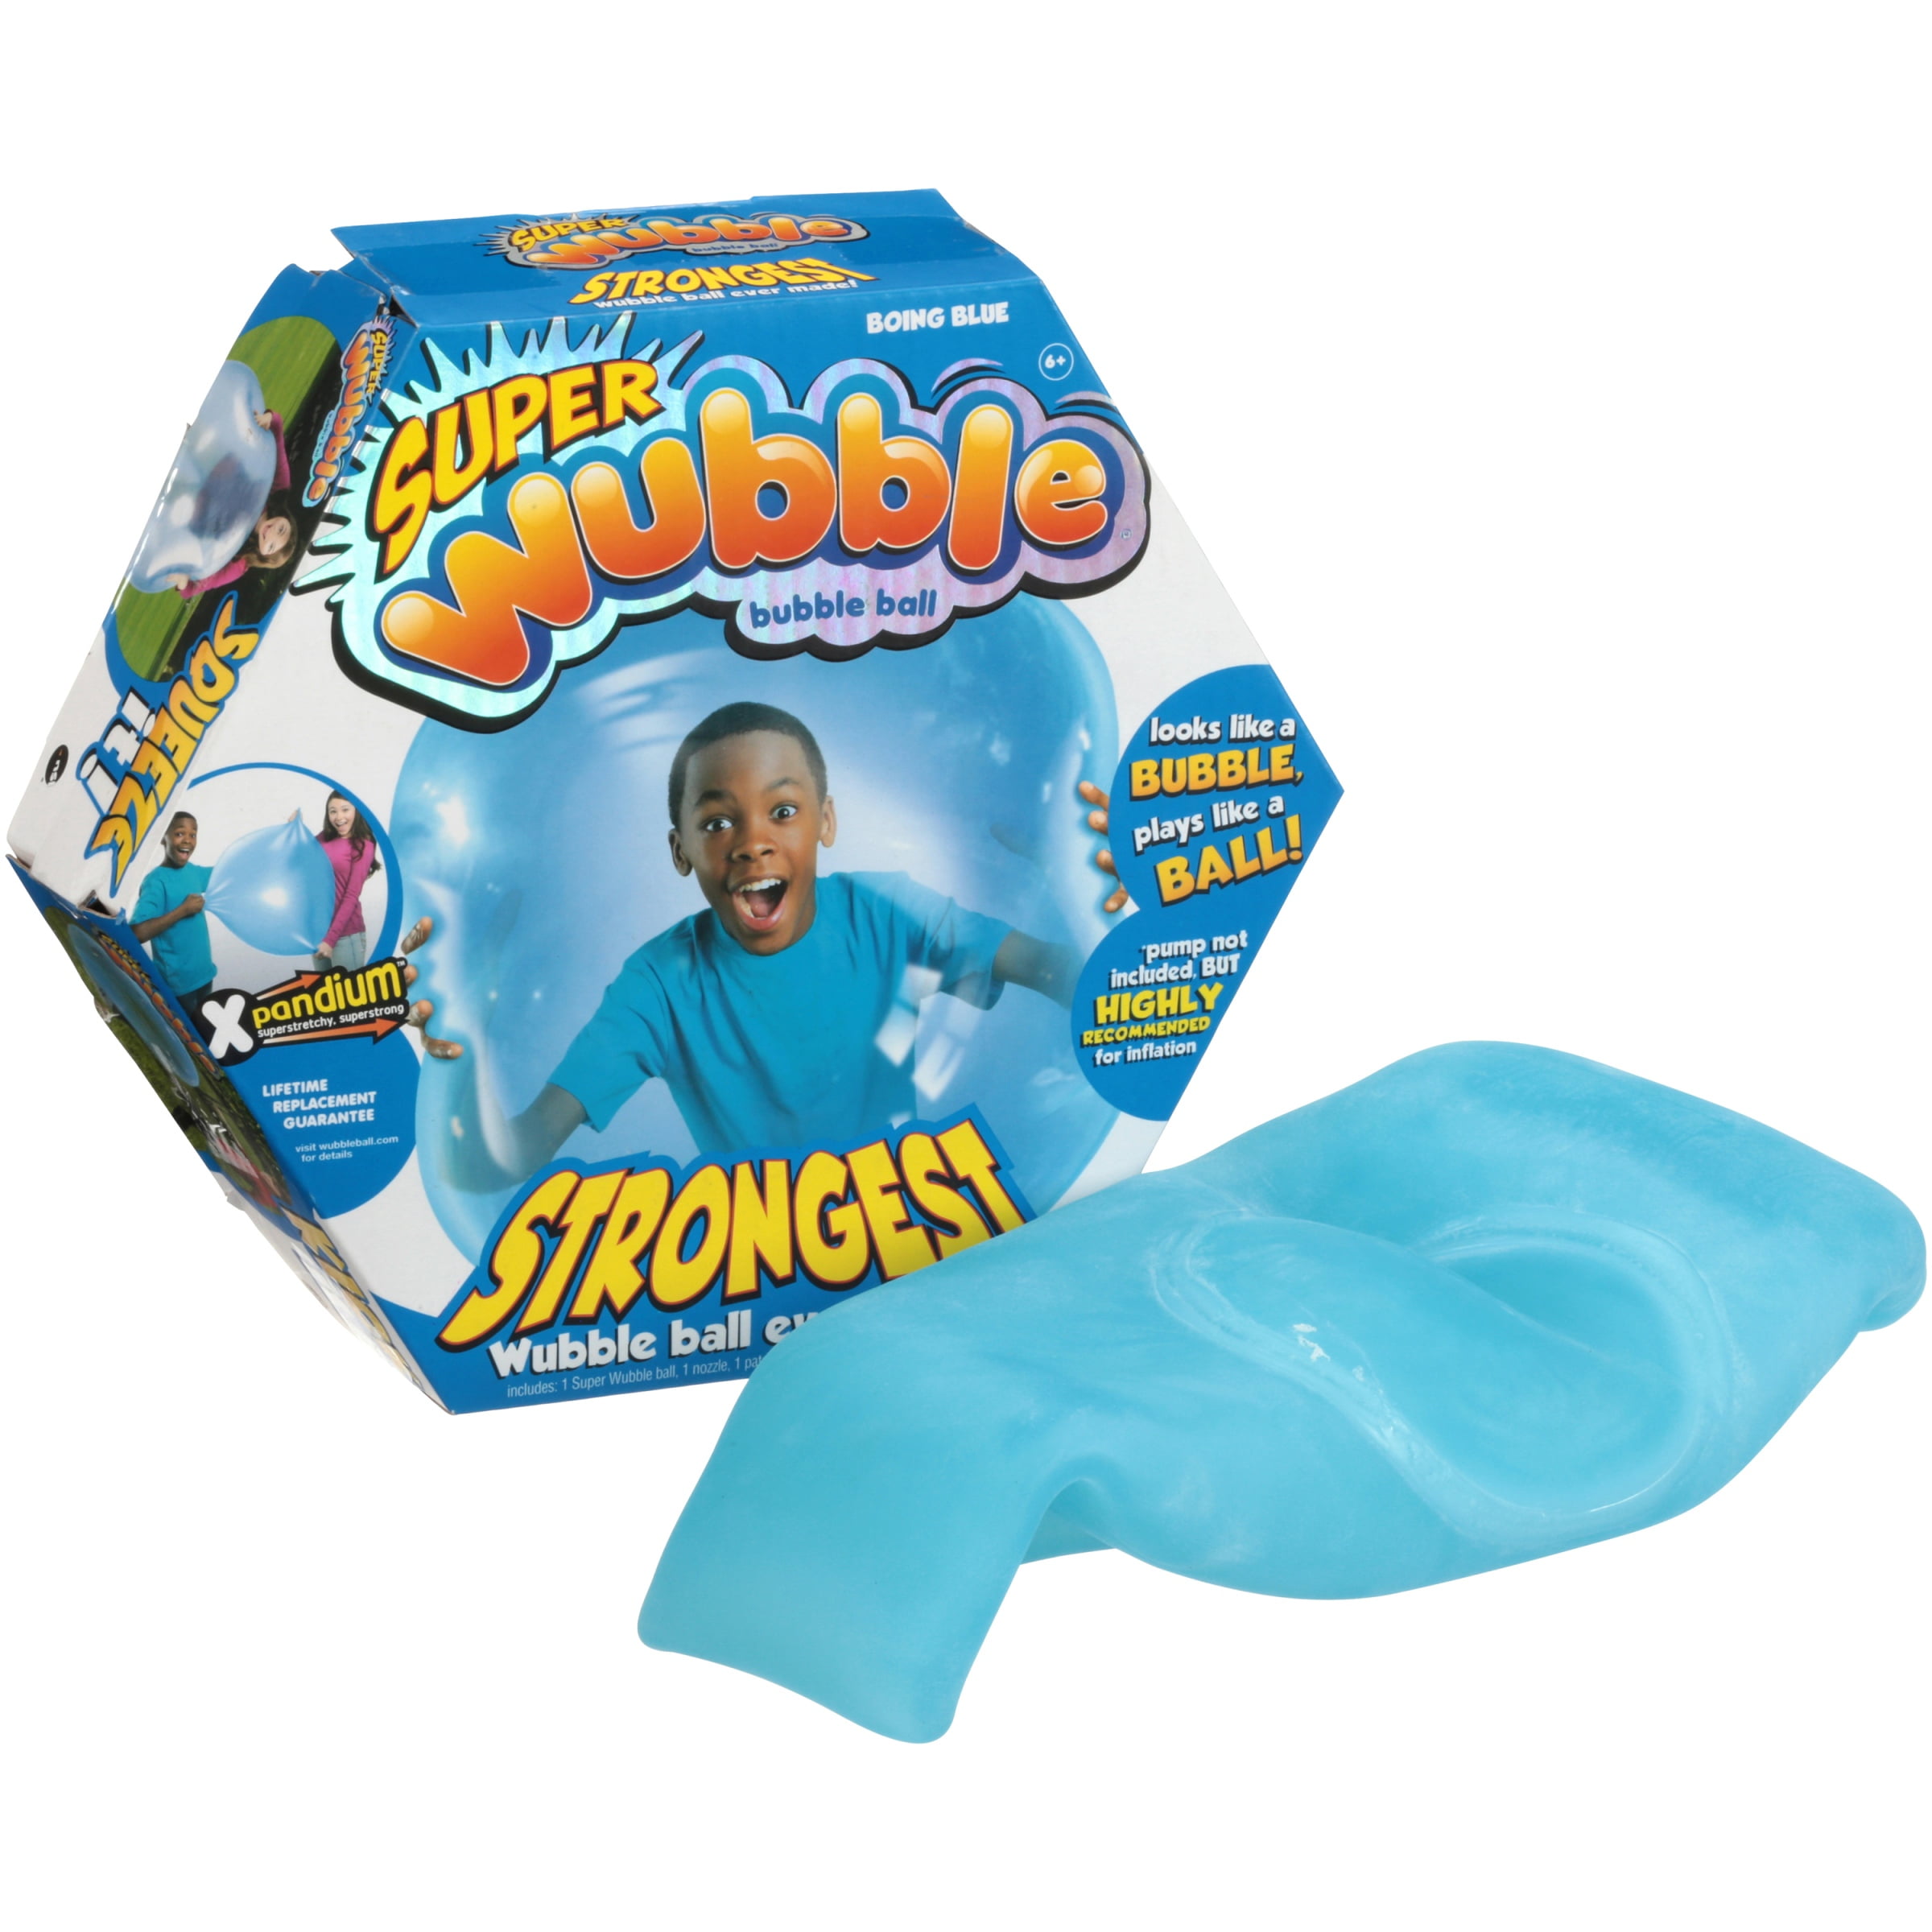 No Nozzle Details about   The Amazing WUBBLE Bubble Ball Air Pump Battery Operated 72060-1 